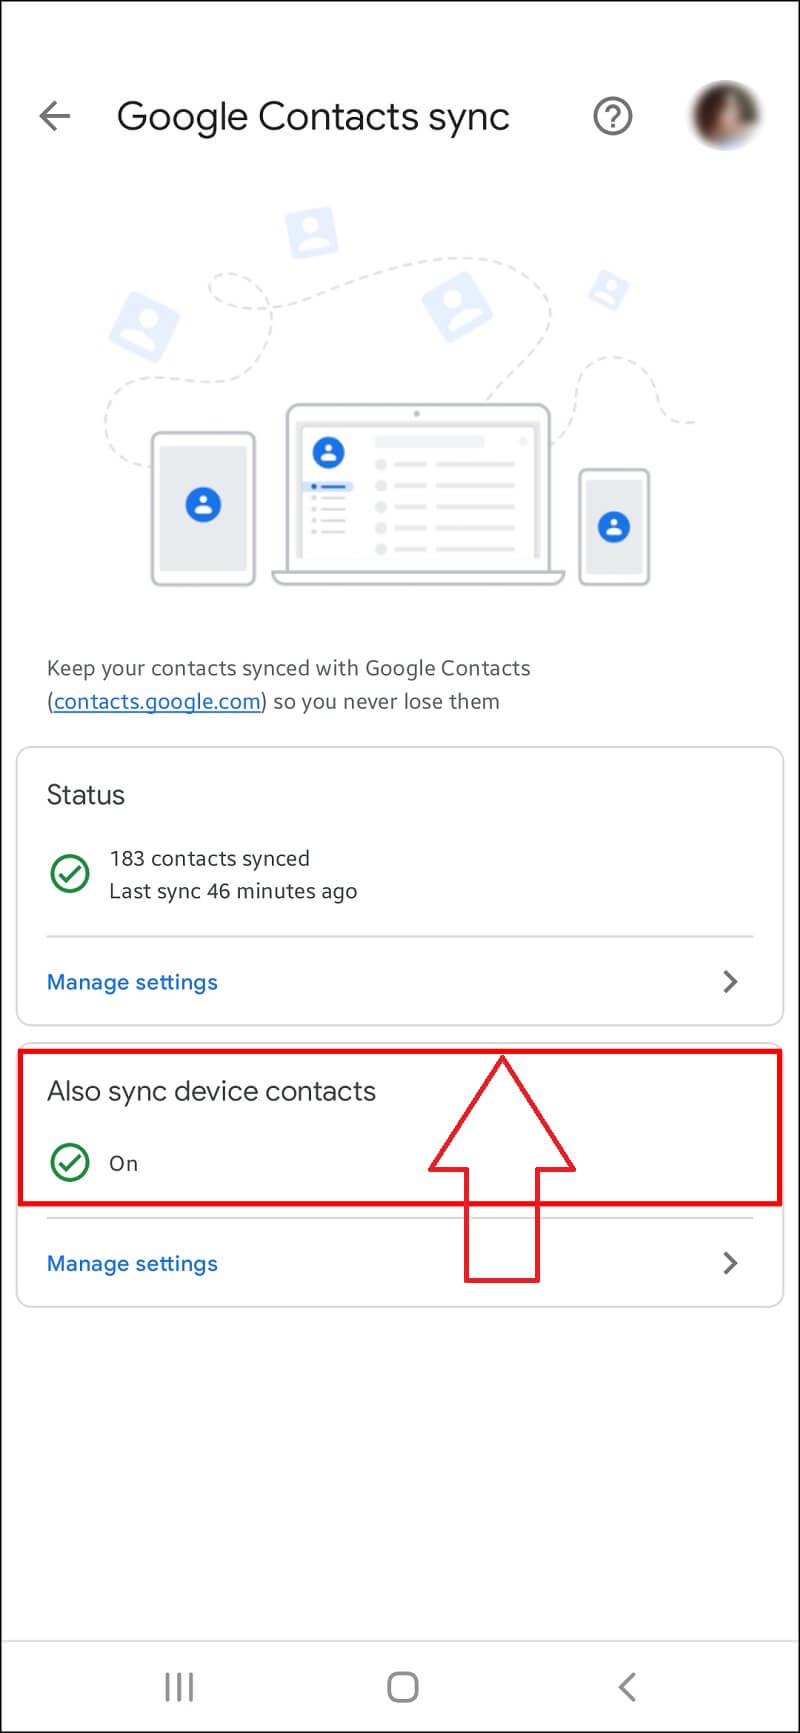 interface of google contact sync